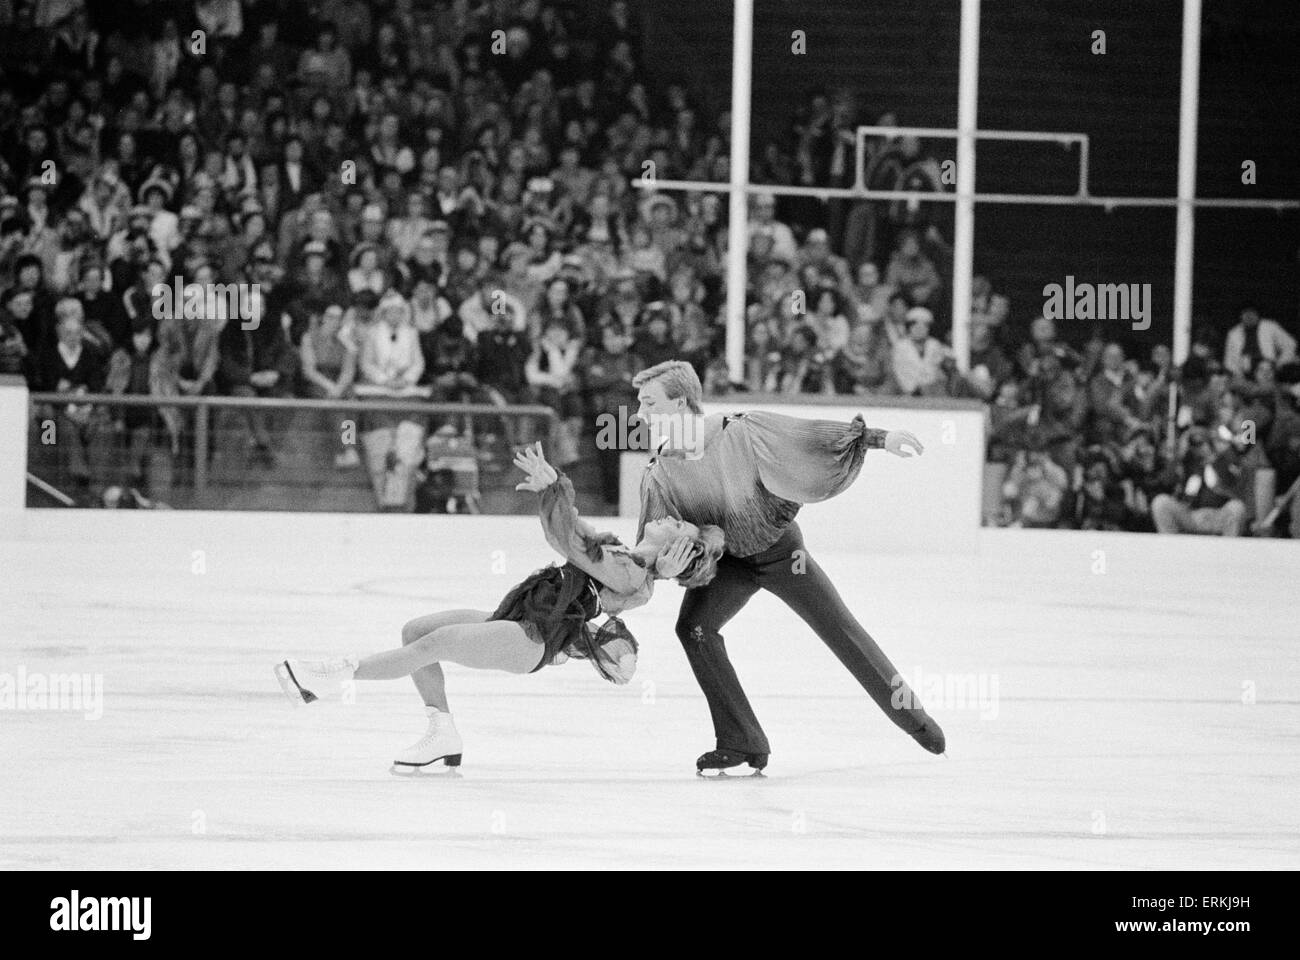 Great Britain's Jayne Torvill and Christopher Dean during their famous 'Bolero' routine at the Zetra Stadium in the 1984 Winter Olympic Games in Sarajevo, Yugoslavia. The team racked up an unprecedented 12 perfect scores to win the gold medal for this performance. 14th February 1984. Stock Photo